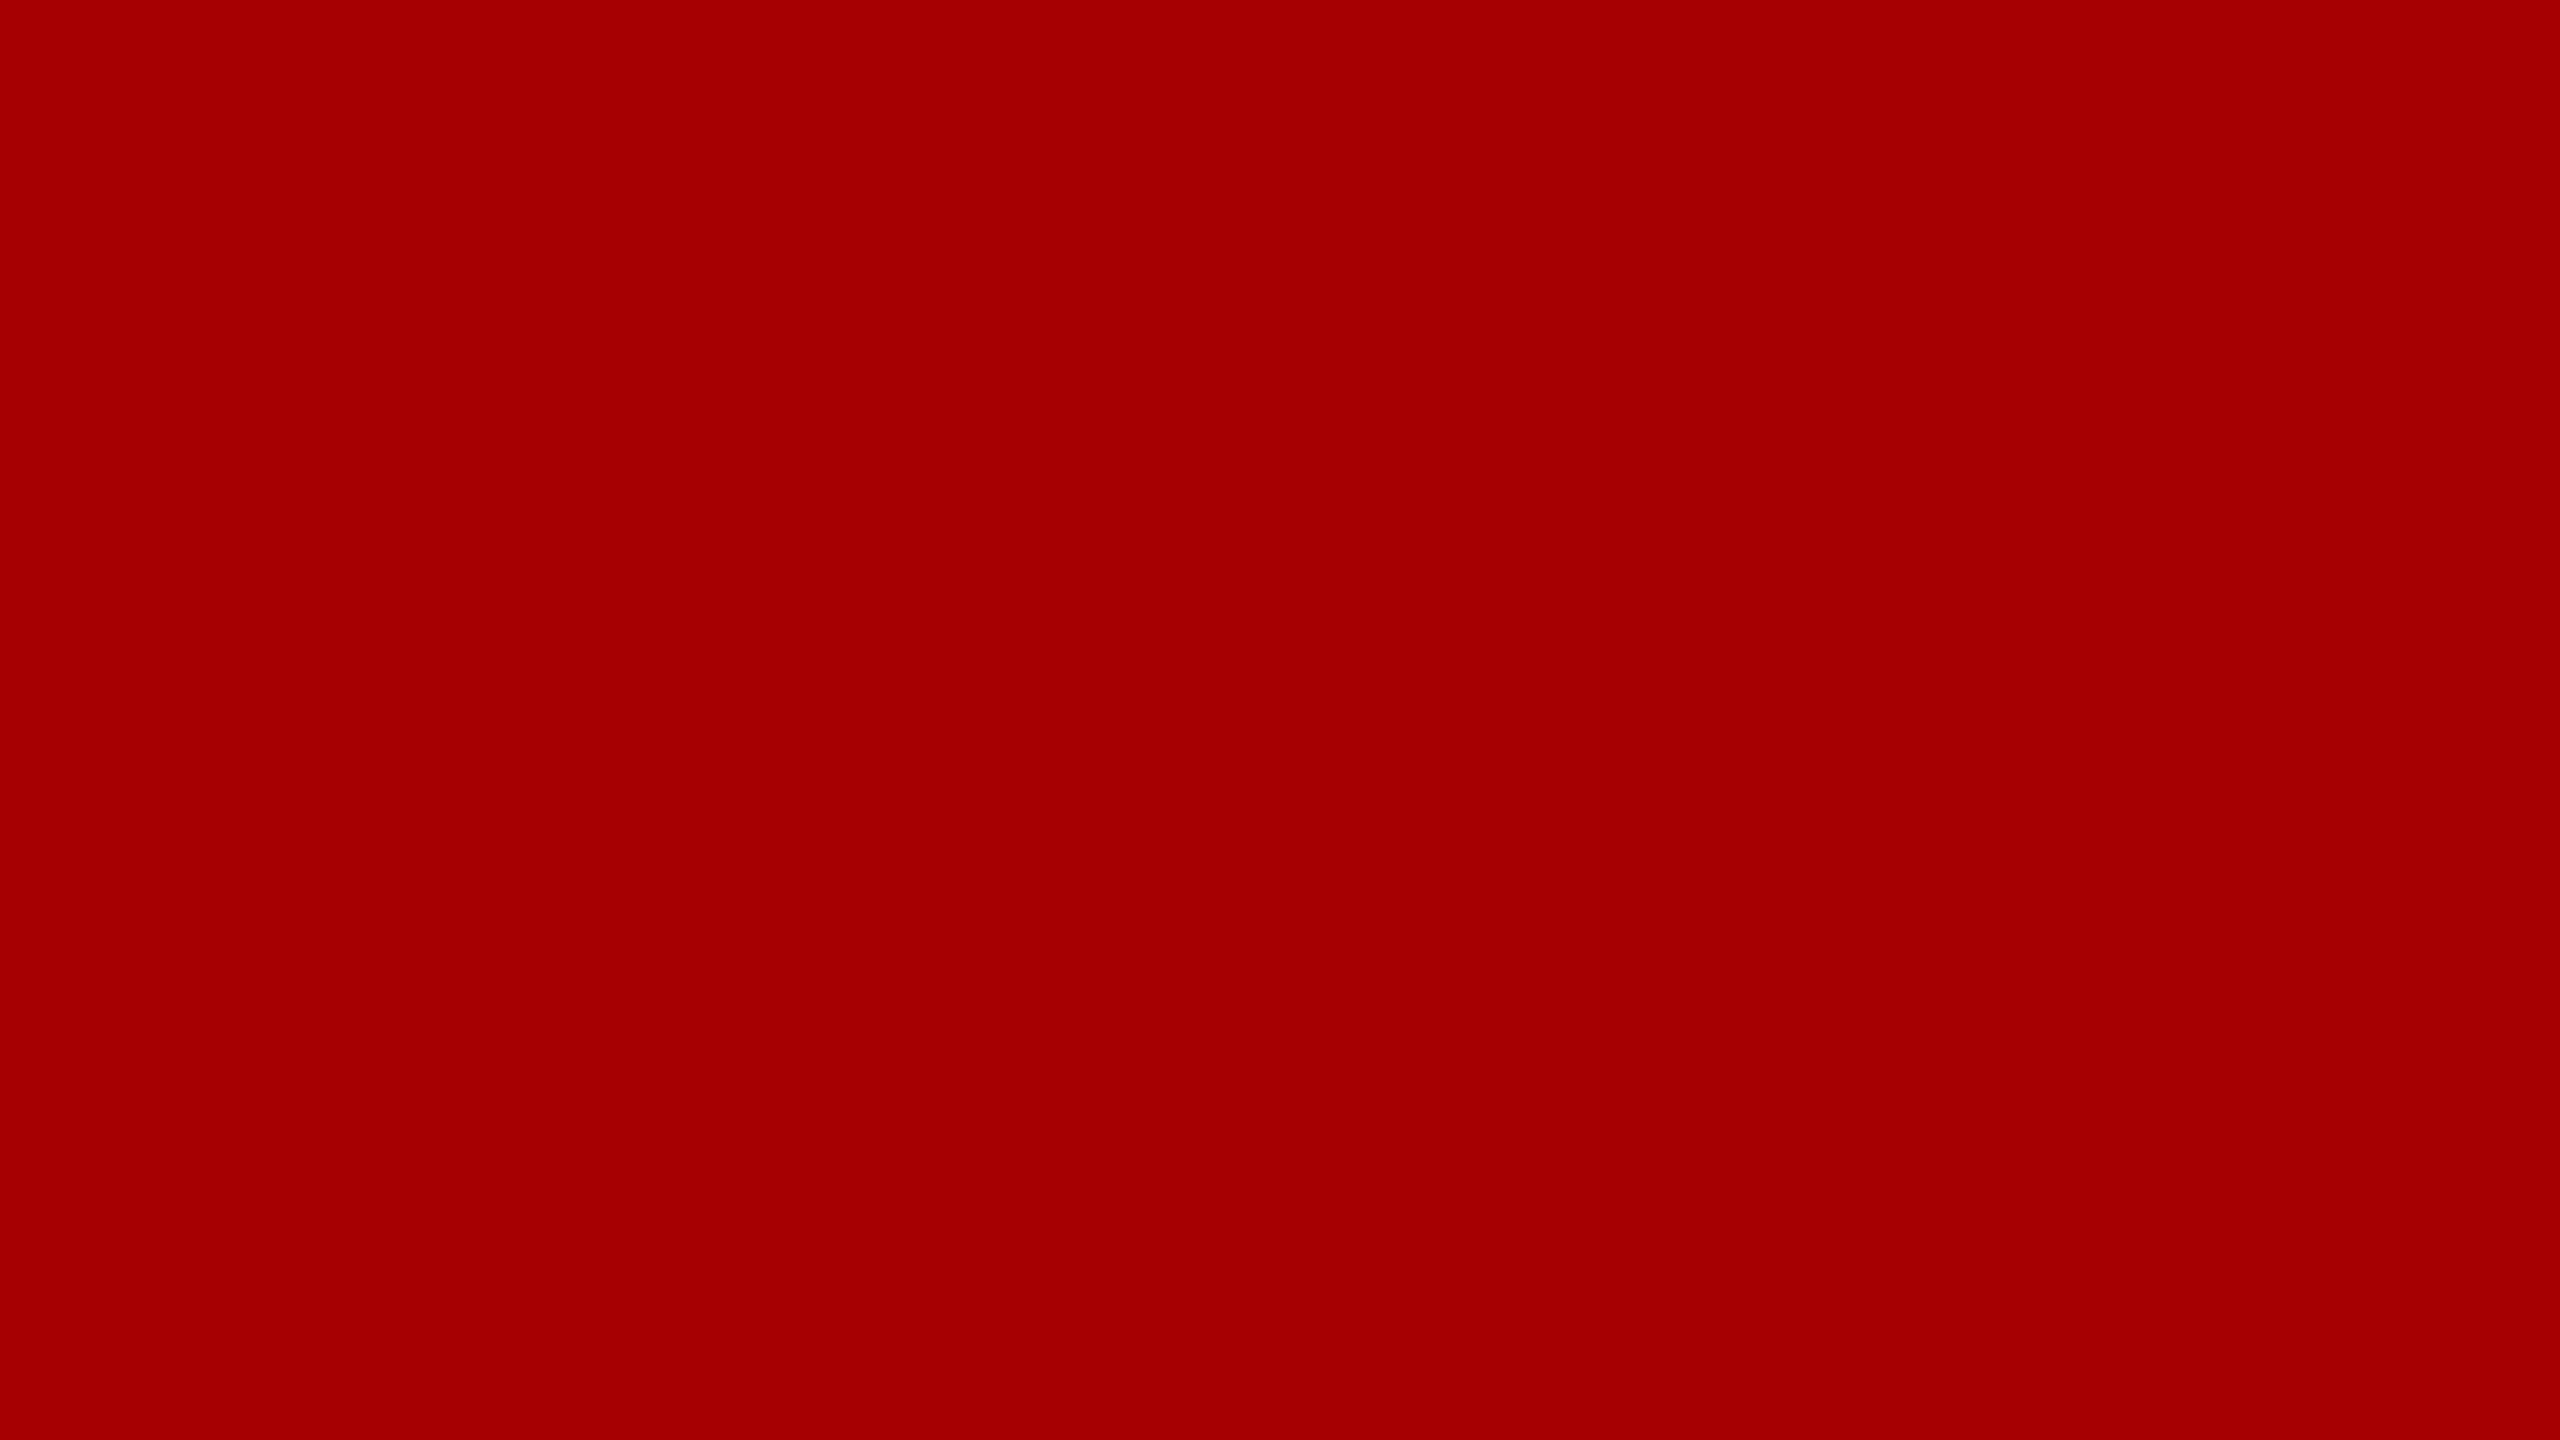 1080x1920 Dark Red Solid Color Background